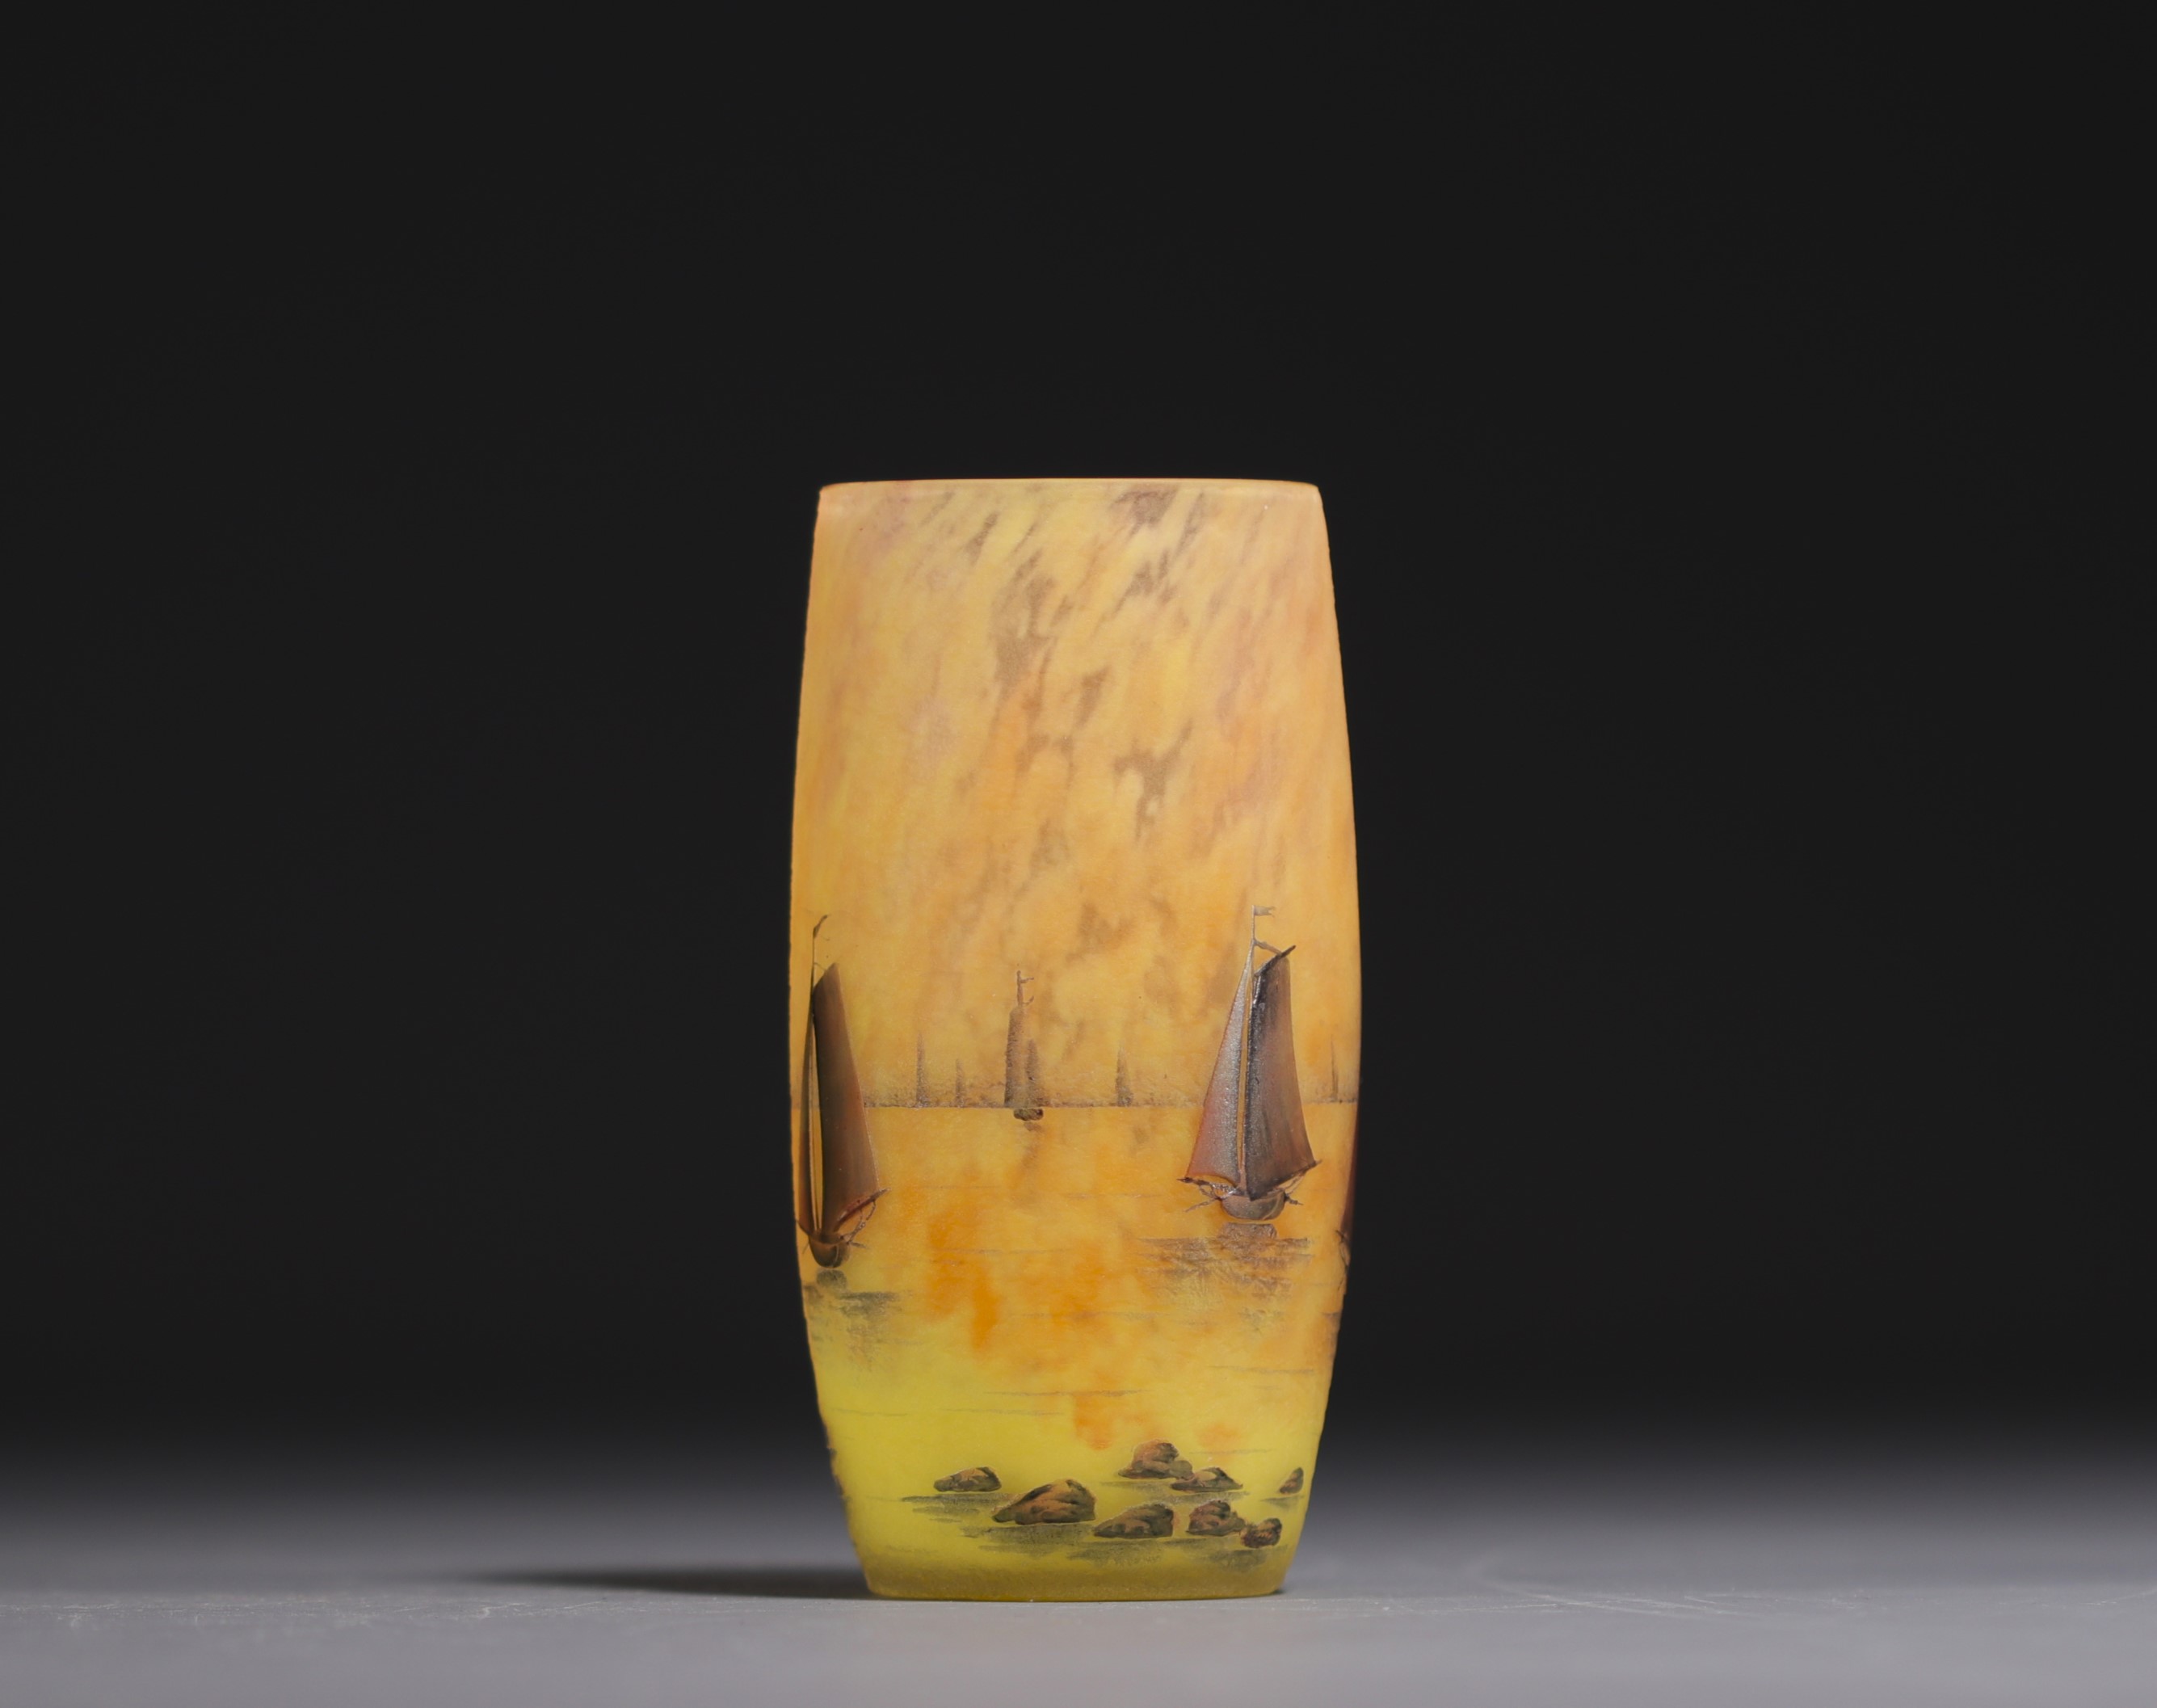 DAUM Nancy - Small shaded and enamelled glass vase with sailboats design, signed under the base. - Image 3 of 5